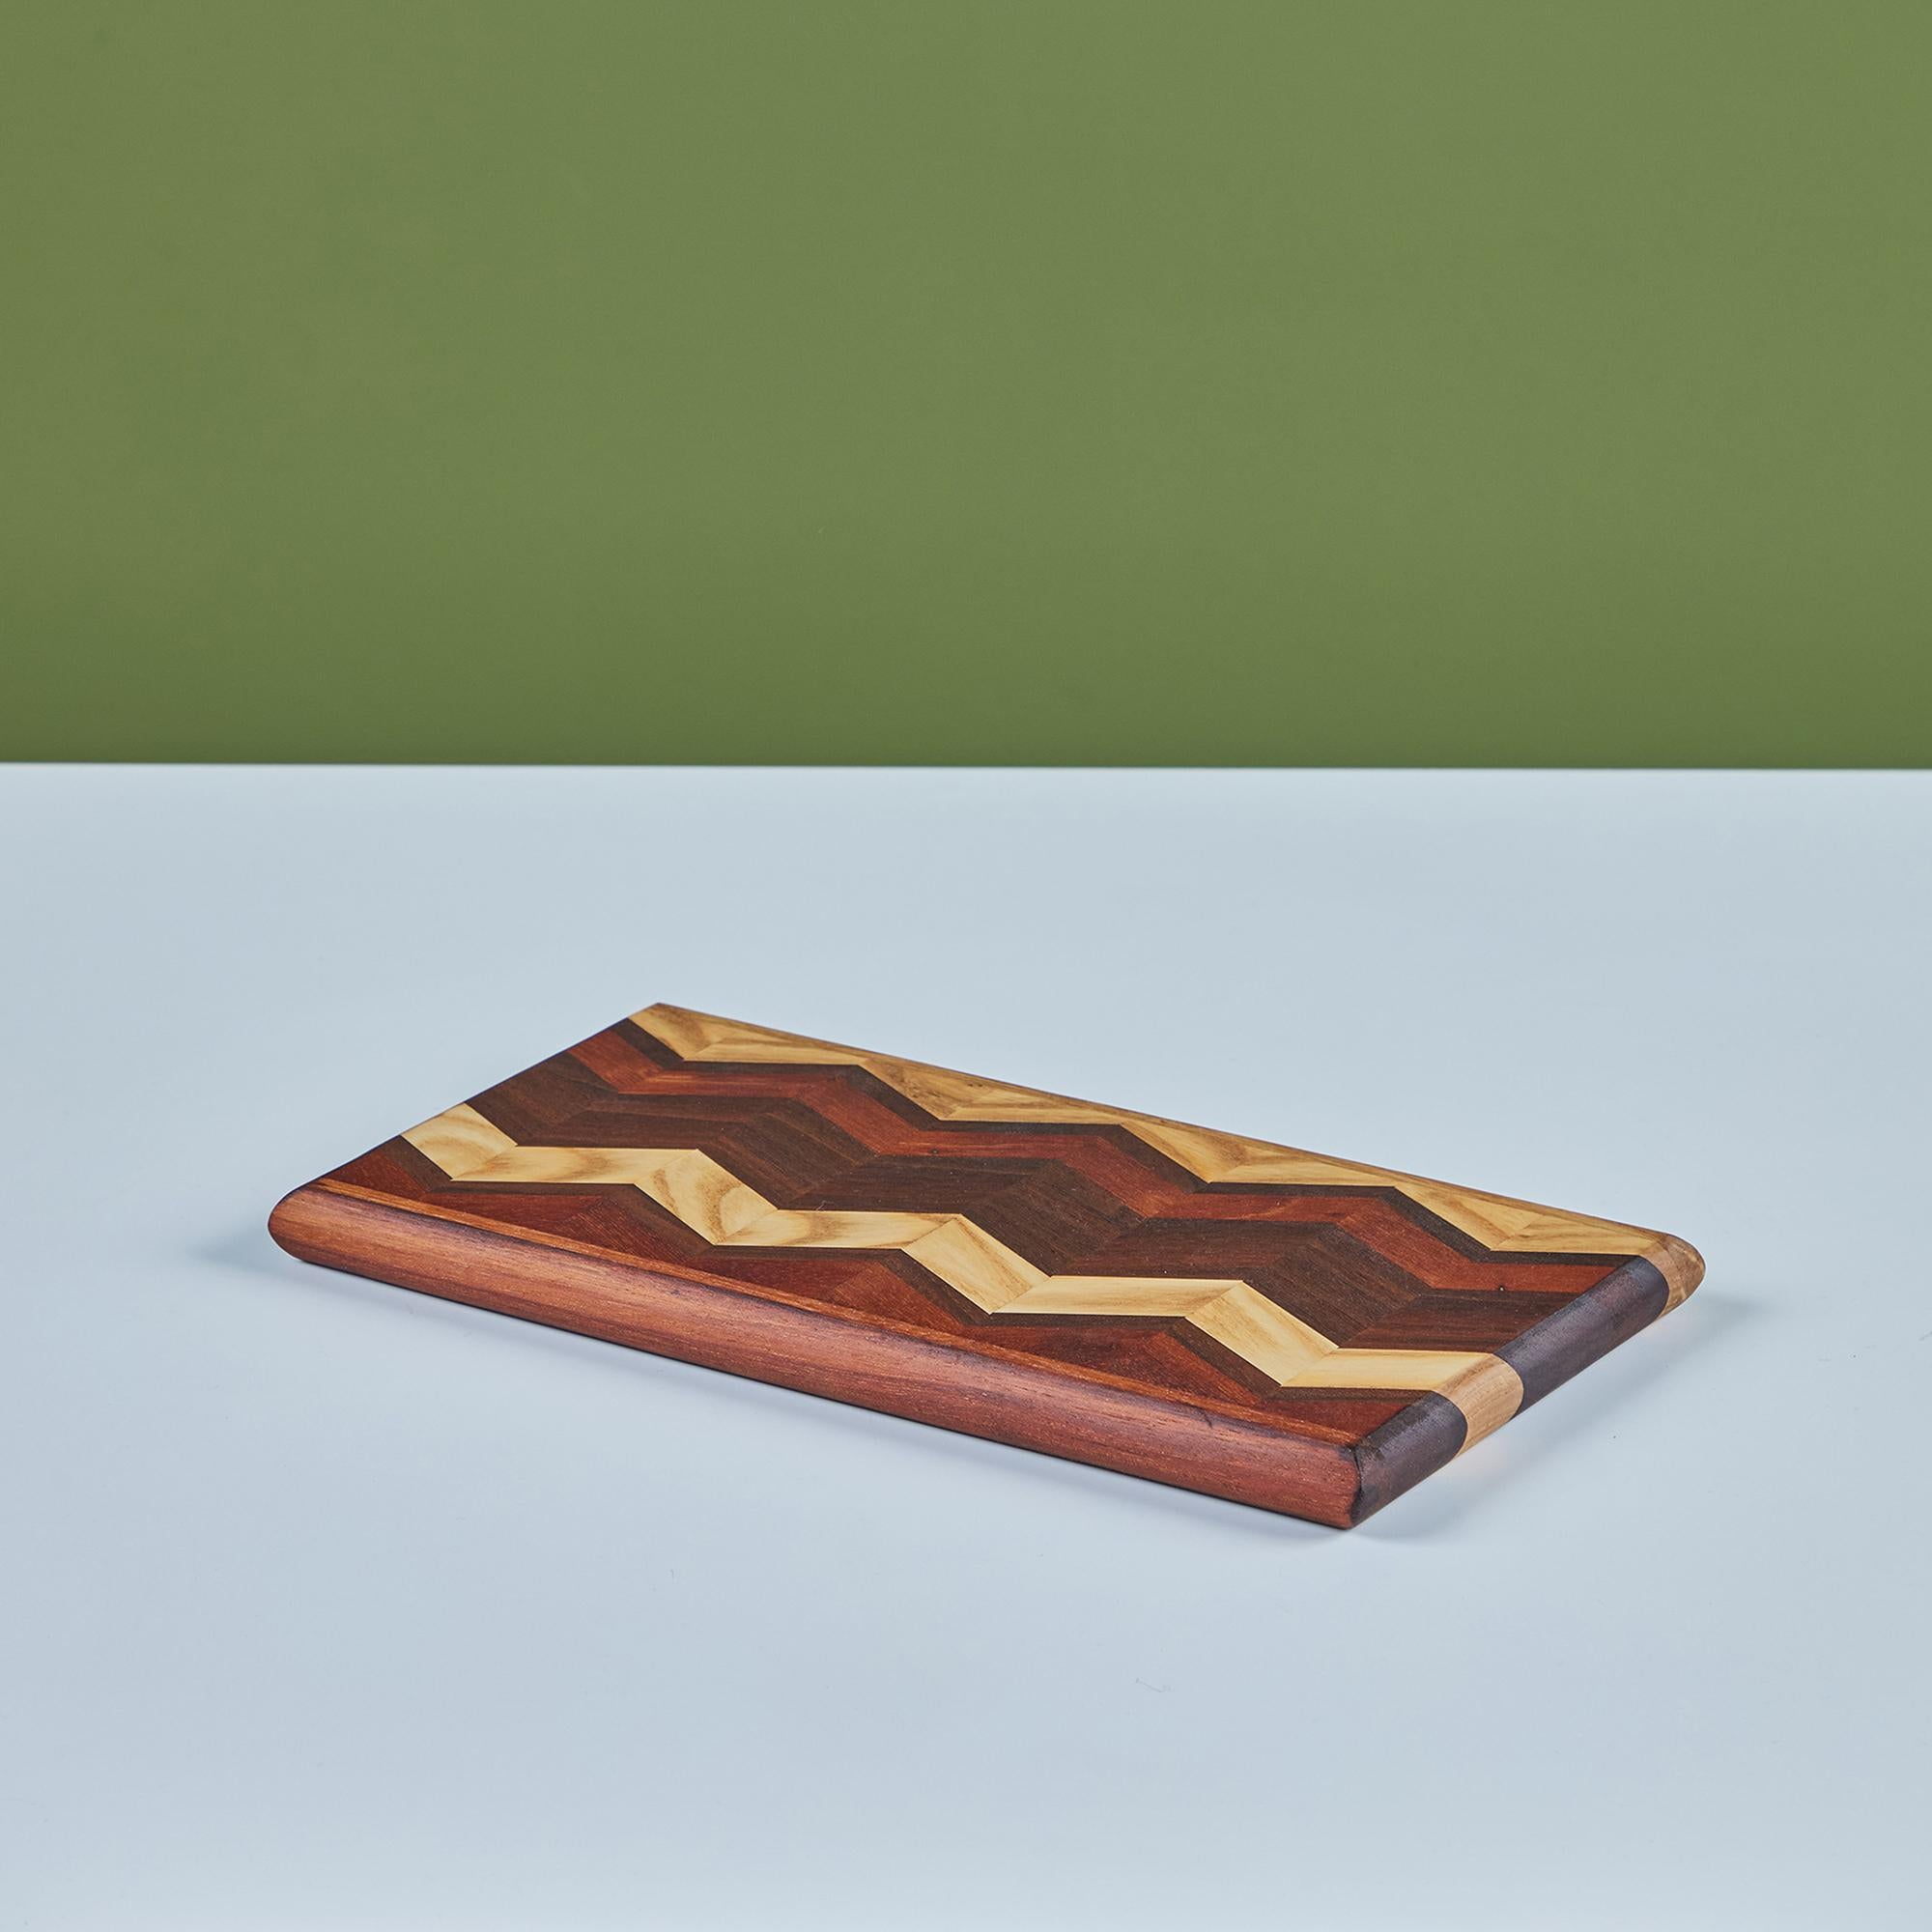 Cutting board by Don Shoemaker for his company Señal in the 1960s. The surface of the board has a repeating chevron marquetry pattern in a gradient of local Mexican hardwoods that can be viewed on both sides. 

CITES Notice: Due to stringent